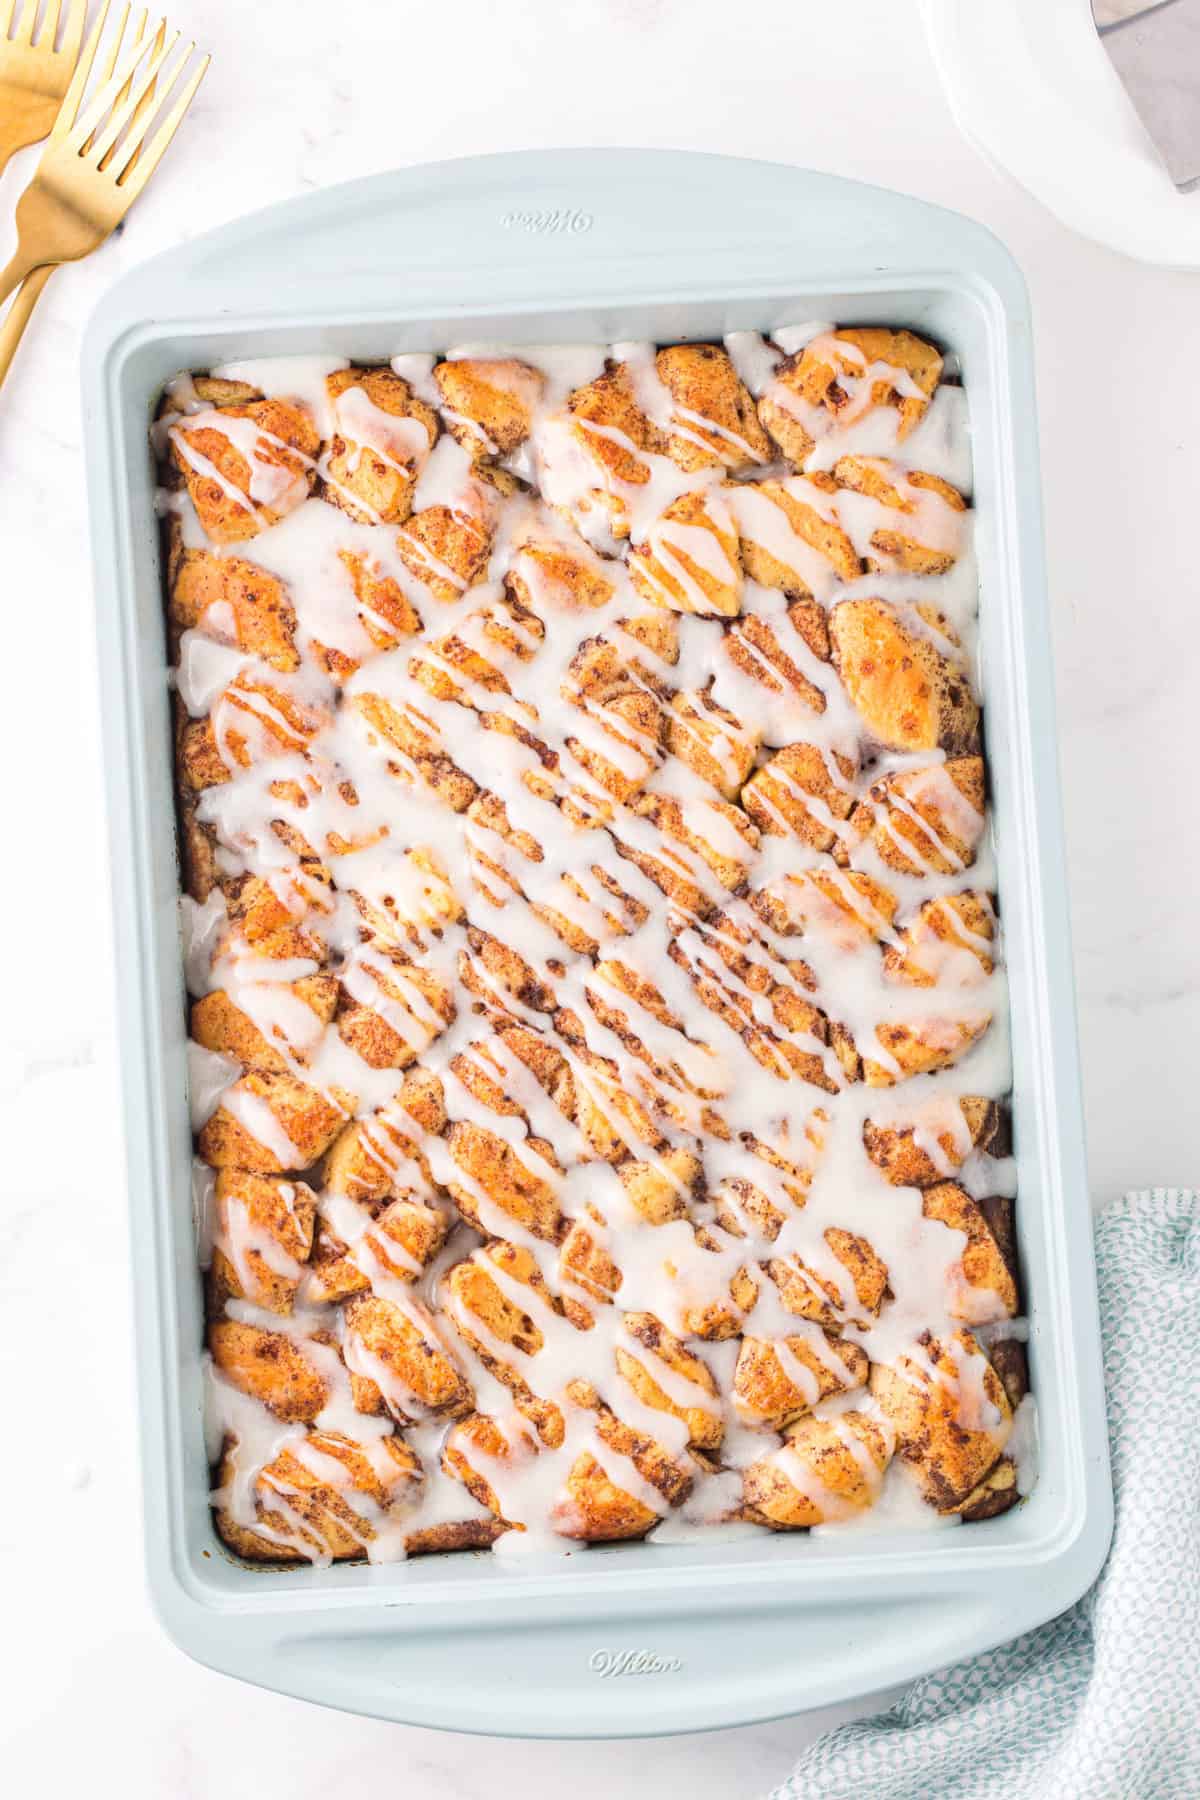 cinnamon roll casserole with icing drizzled on top in light blue baking dish